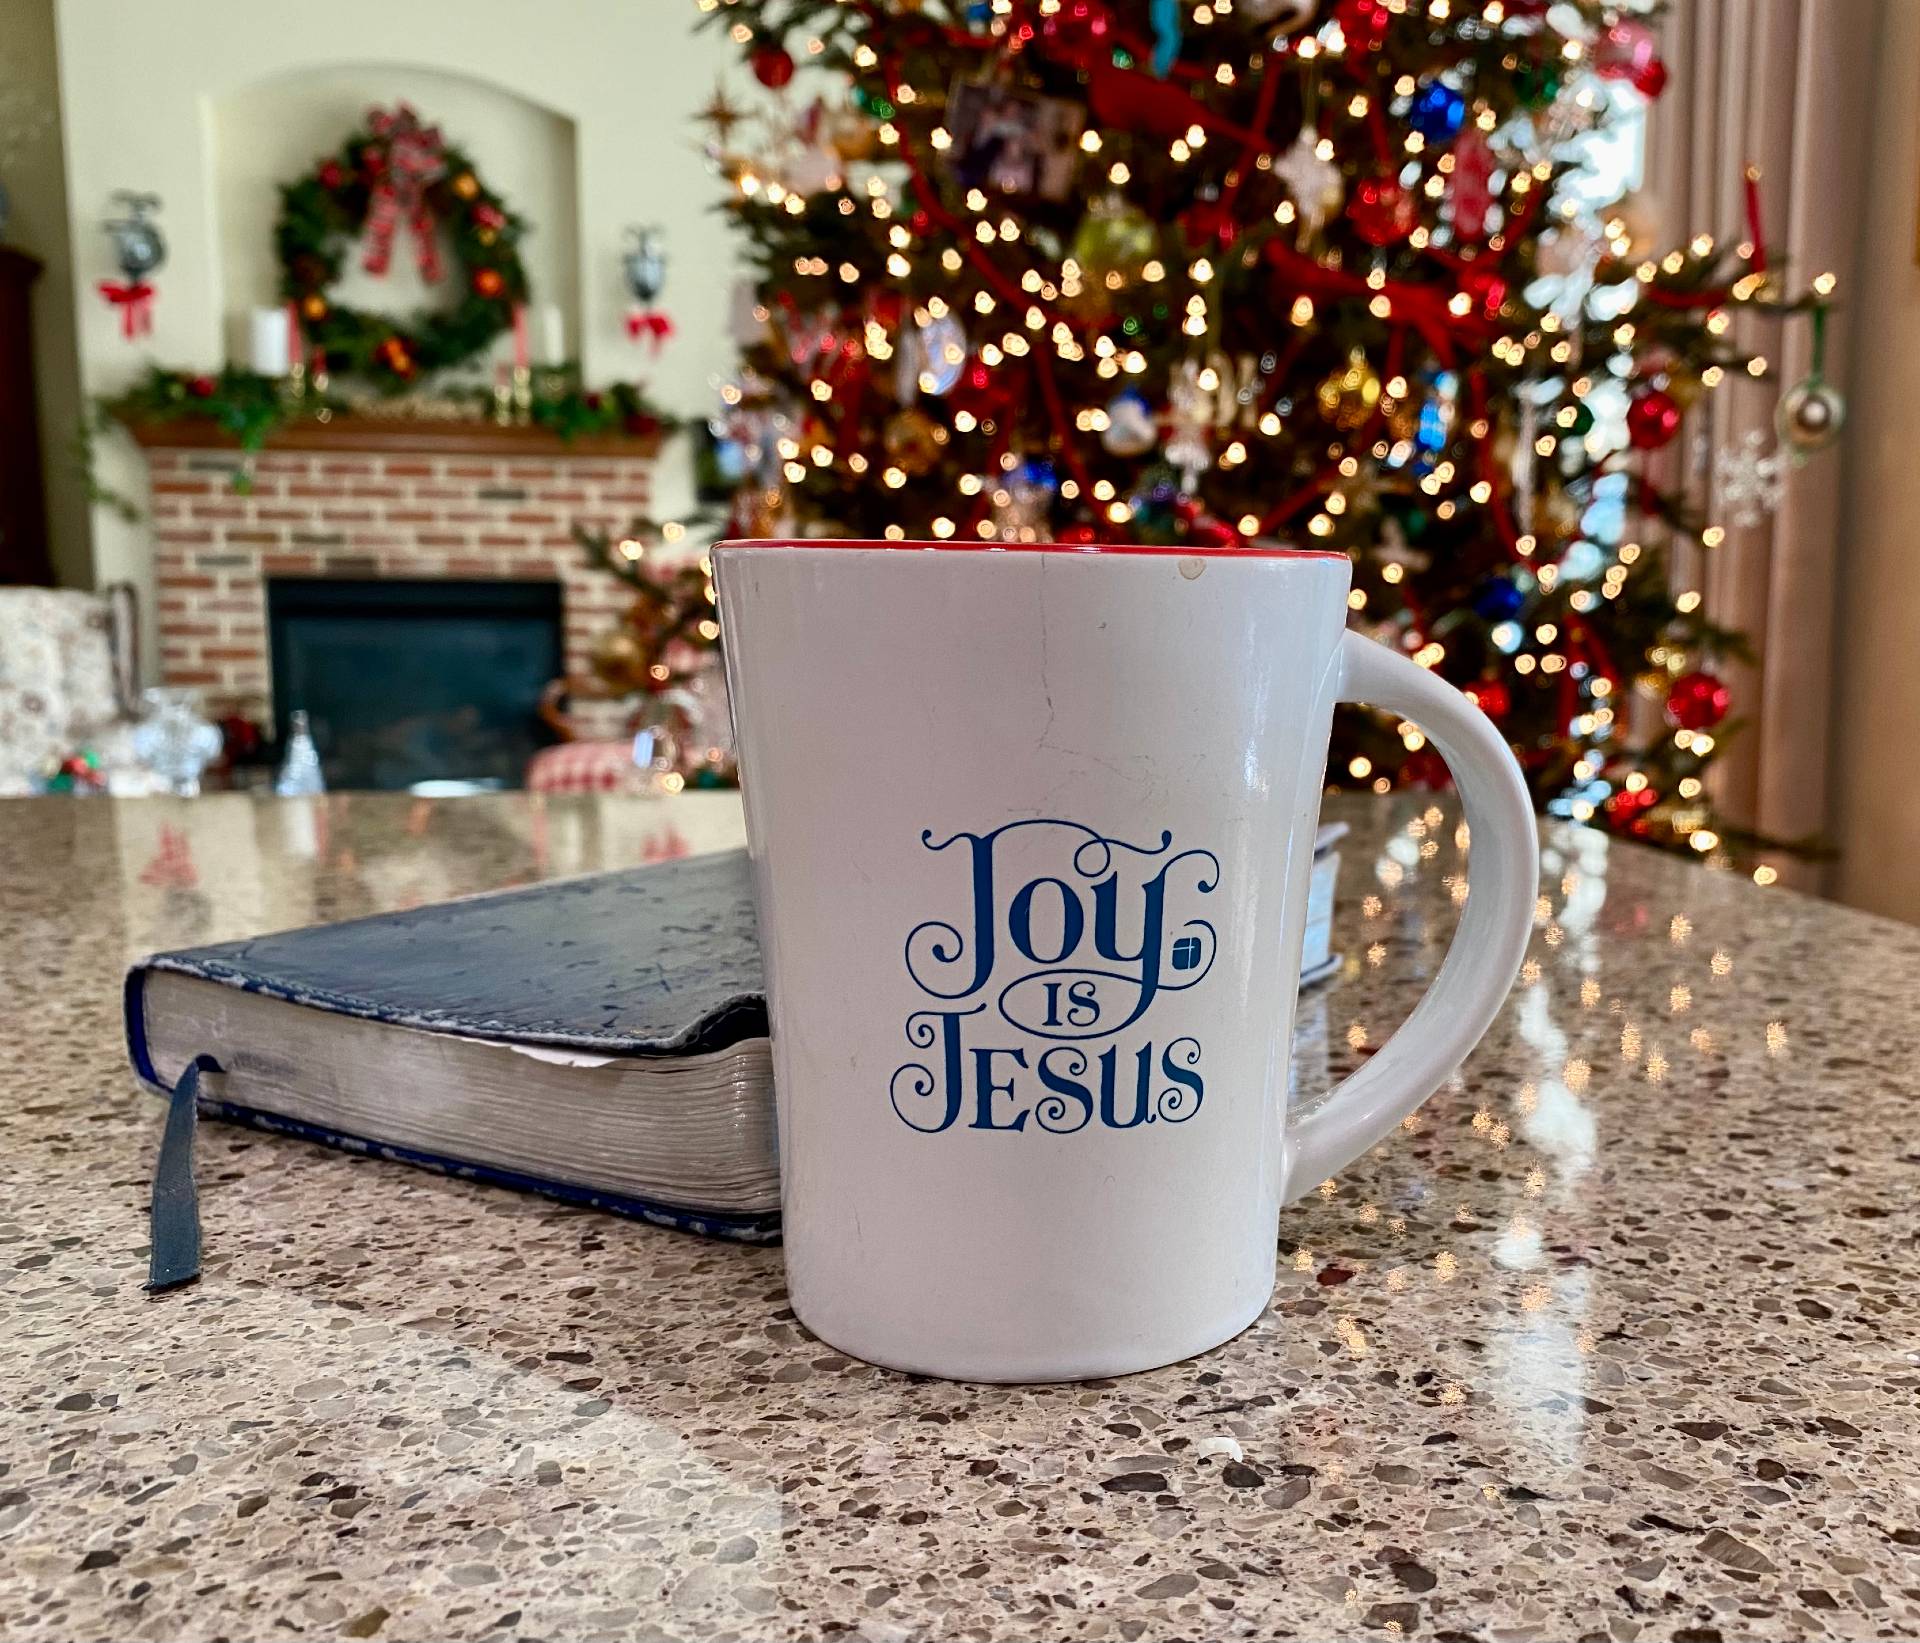 Real Christmas joy is found in Jesus.